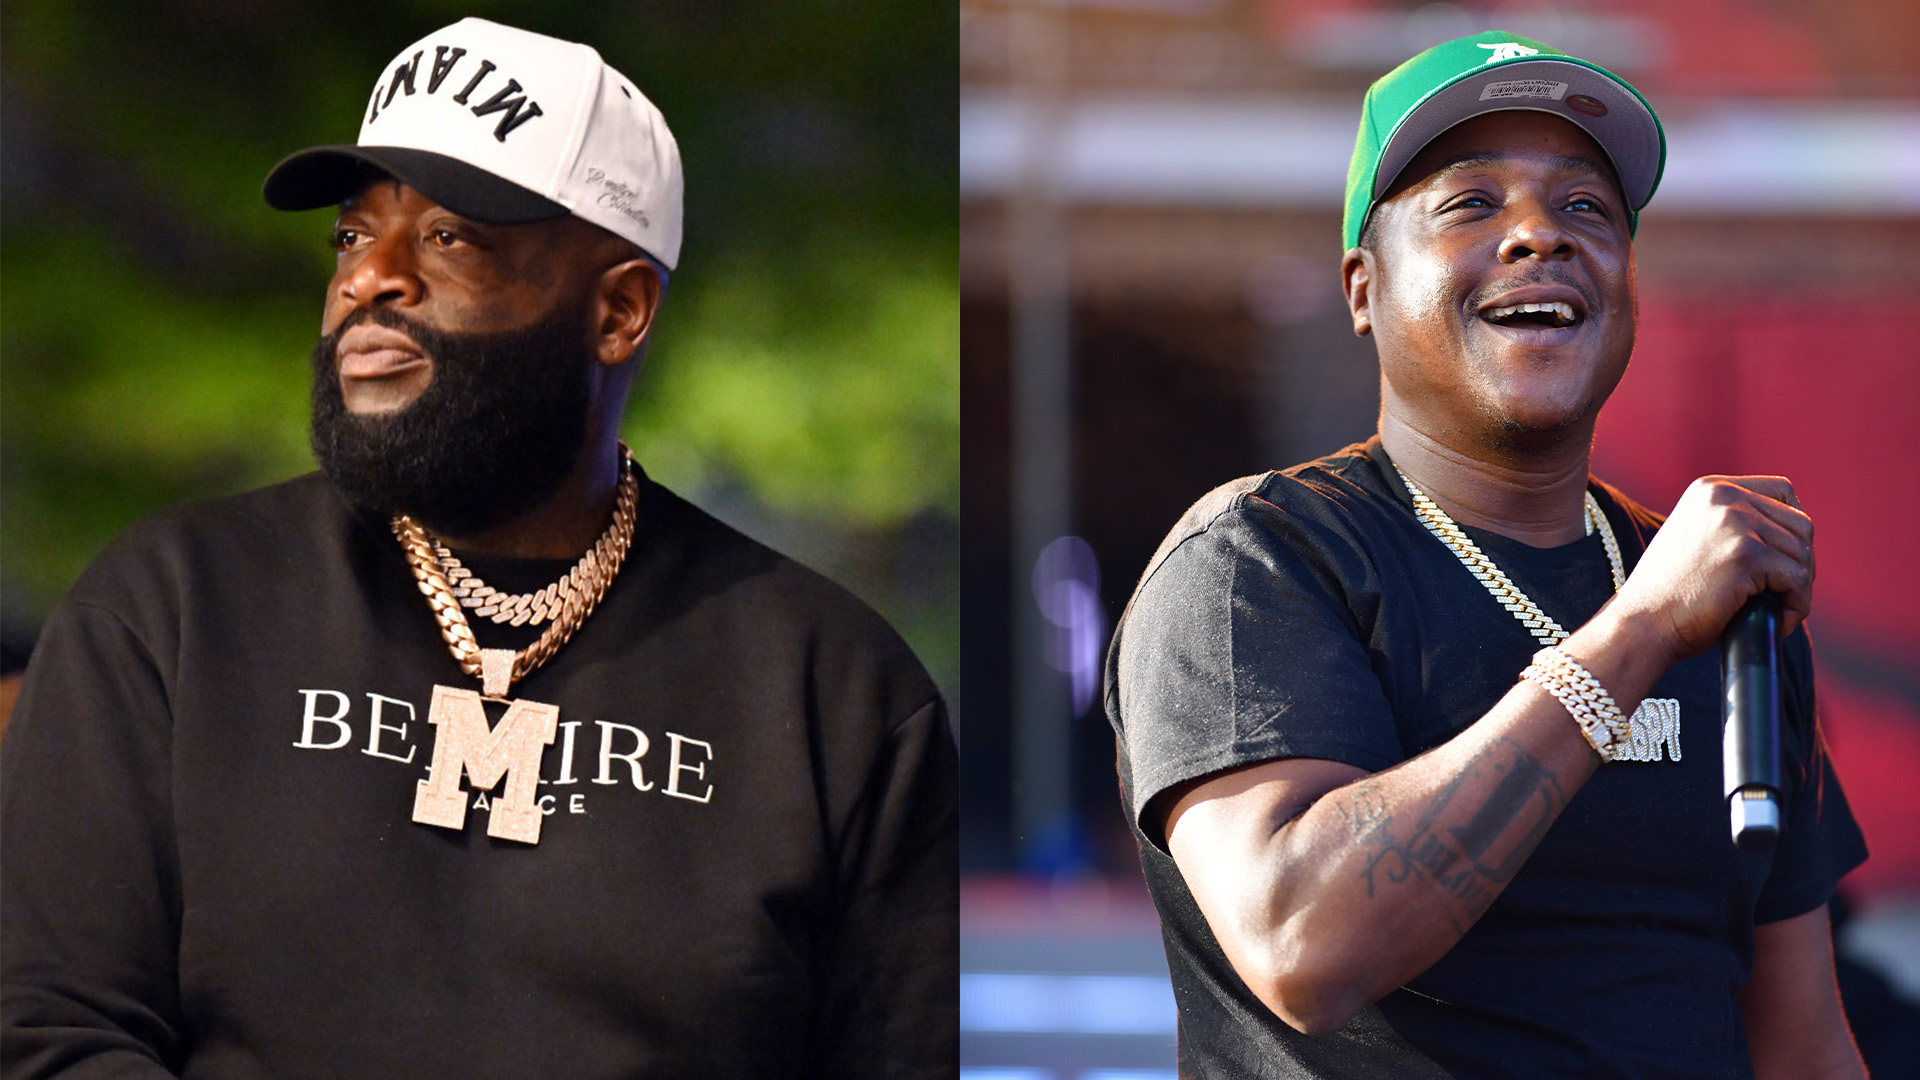 What To Expect From The AFROTECH Music Experience — Jadakiss, Rick Ross, And More Set To Hit The Stage